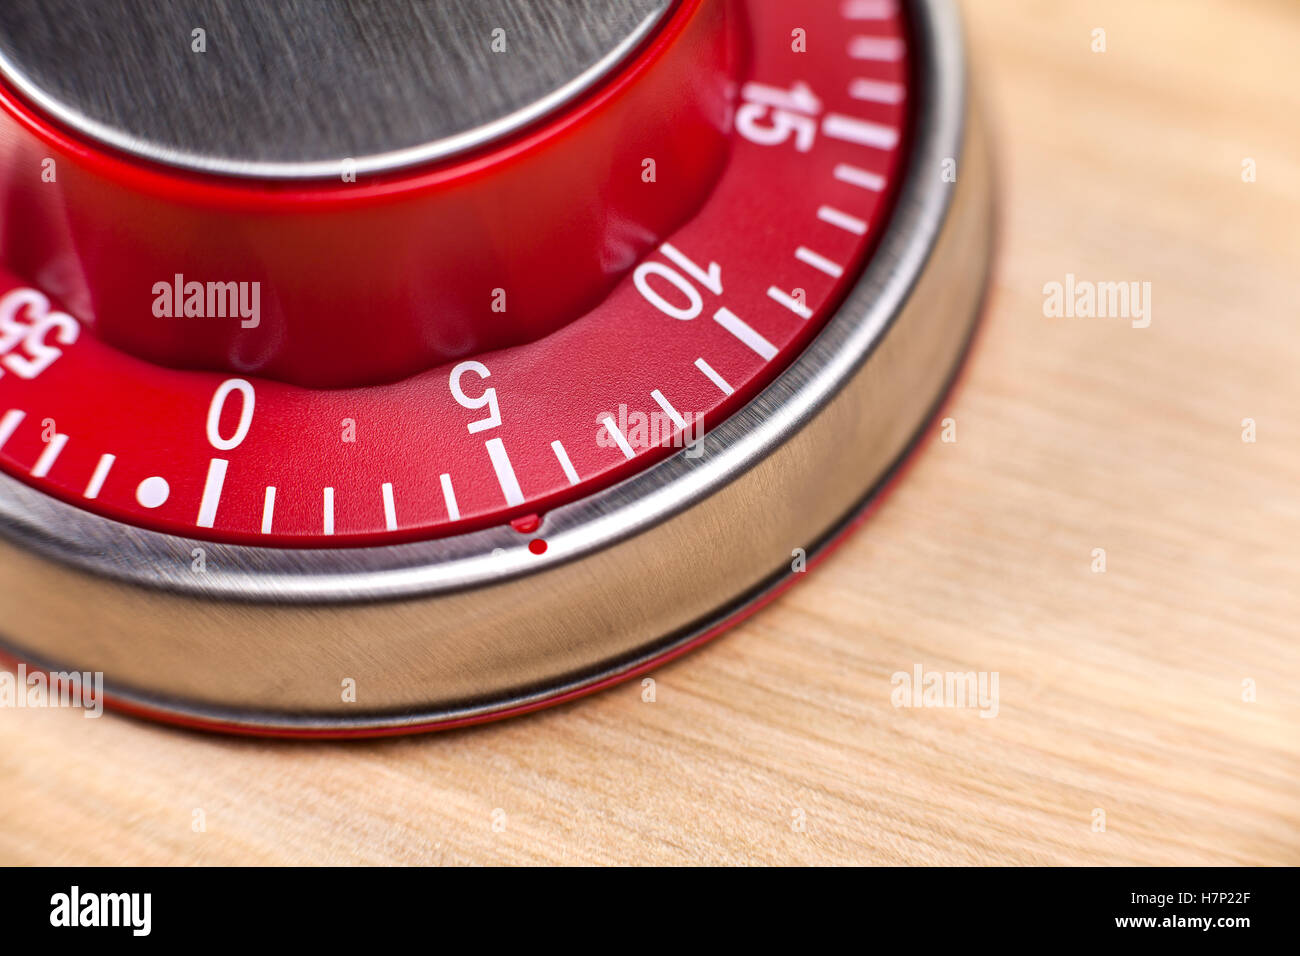 Macro view of a red kitchen egg timer showing 5 minutes on wooden background Stock Photo